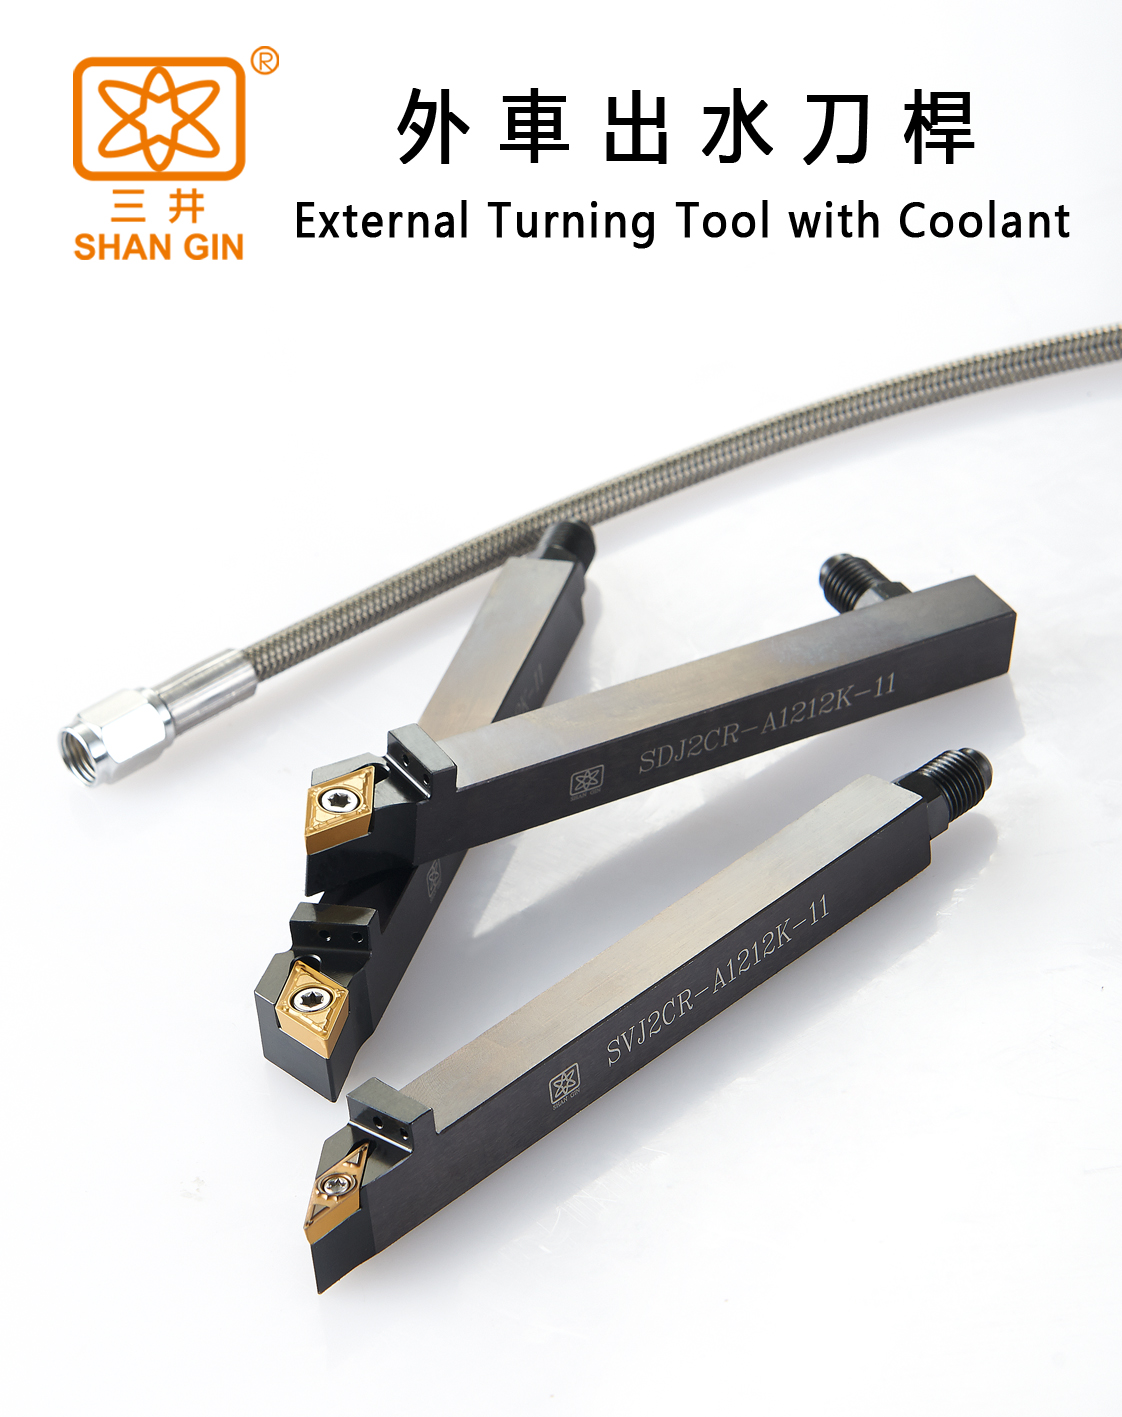 External Turning Tool  with Coolant